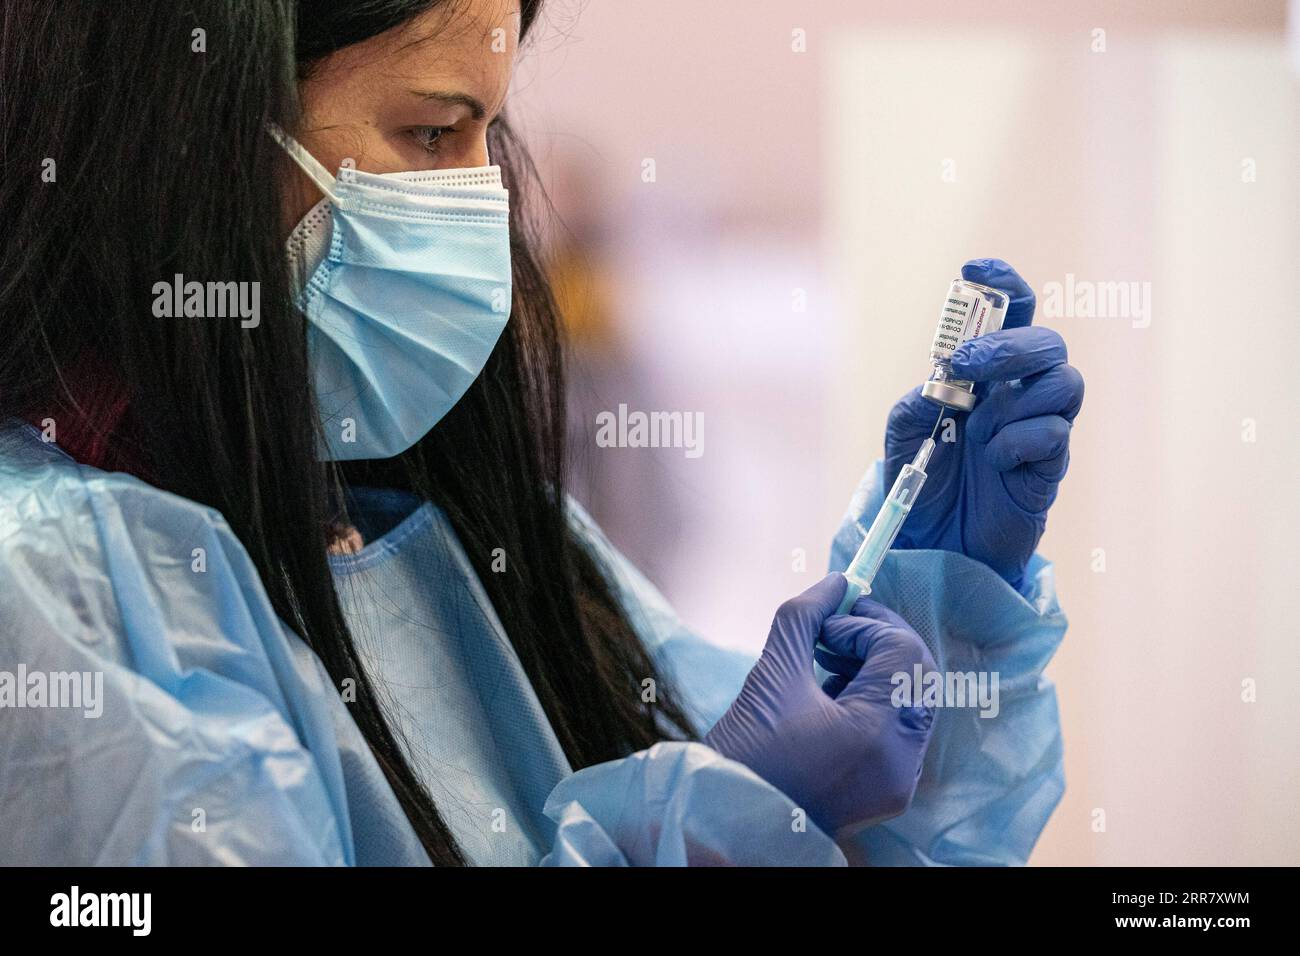 News Bilder des Tages 210407 -- CORNELLA, April 7, 2021 -- A health worker prepares a dose of AstraZeneca COVID-19 vaccine at a vaccination site in Cornella, Spain, April 7, 2021. The European Medicines Agency EMA confirmed on Wednesday that the occurrence of blood clots with low blood platelets are strongly associated with the administration of AstraZeneca COVID-19 vaccine, but should be still listed as very rare side effects. Photo by /Xinhua SPAIN-CORNELLA-ASTRAZENECA COVID-19 VACCINE JoanxGosa PUBLICATIONxNOTxINxCHN Stock Photo